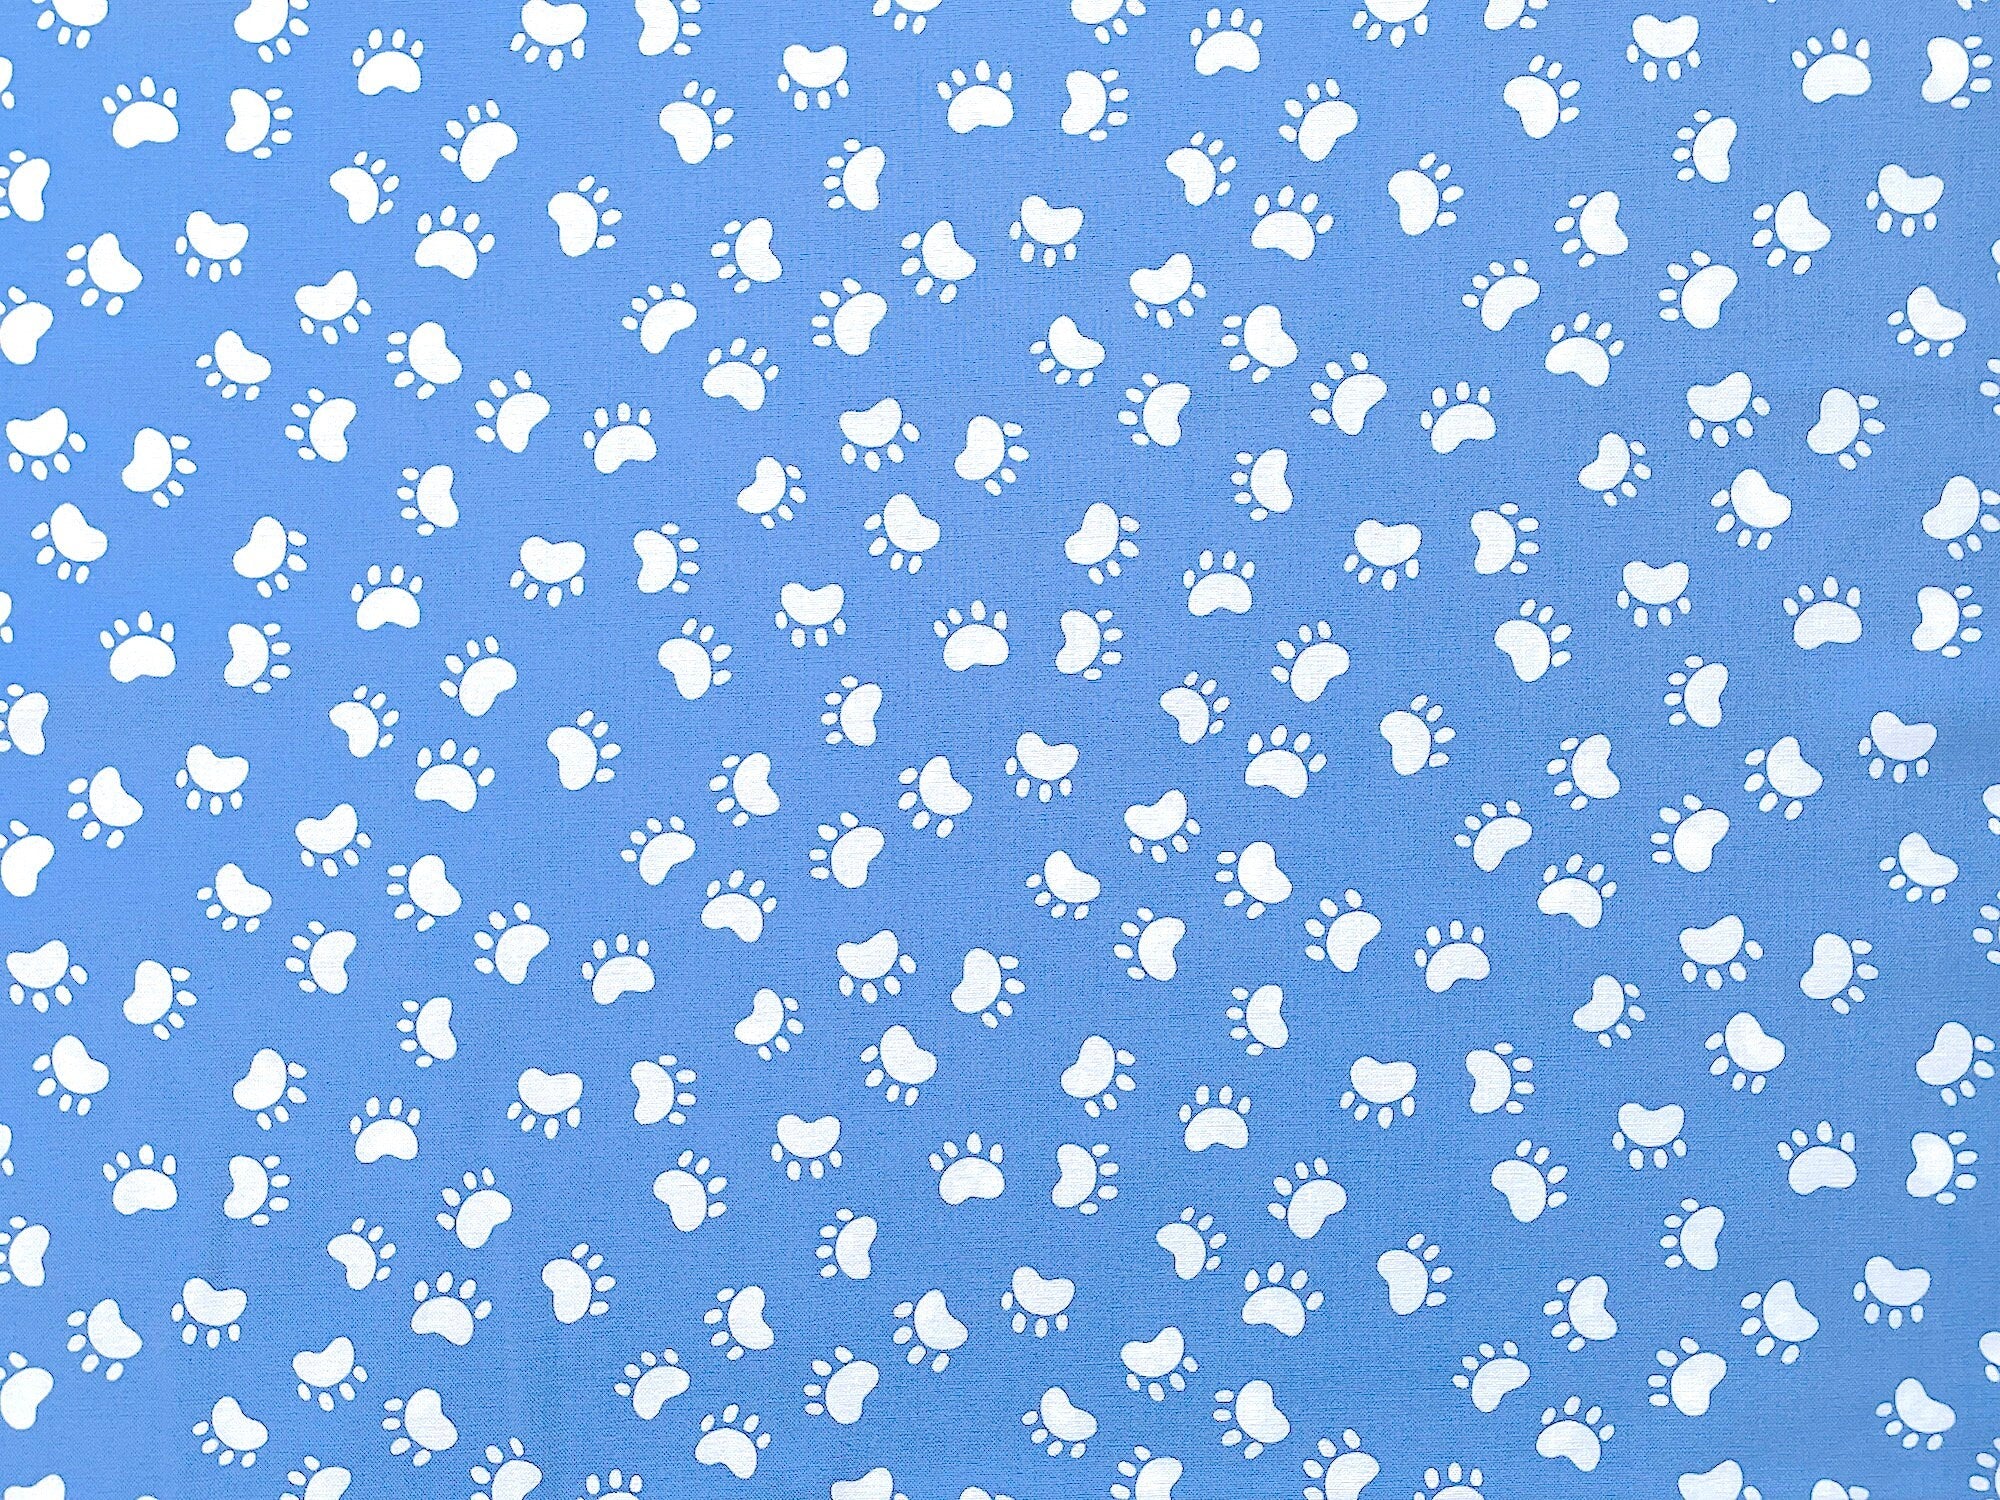 Medium blue cotton fabric covered with white paw prints.